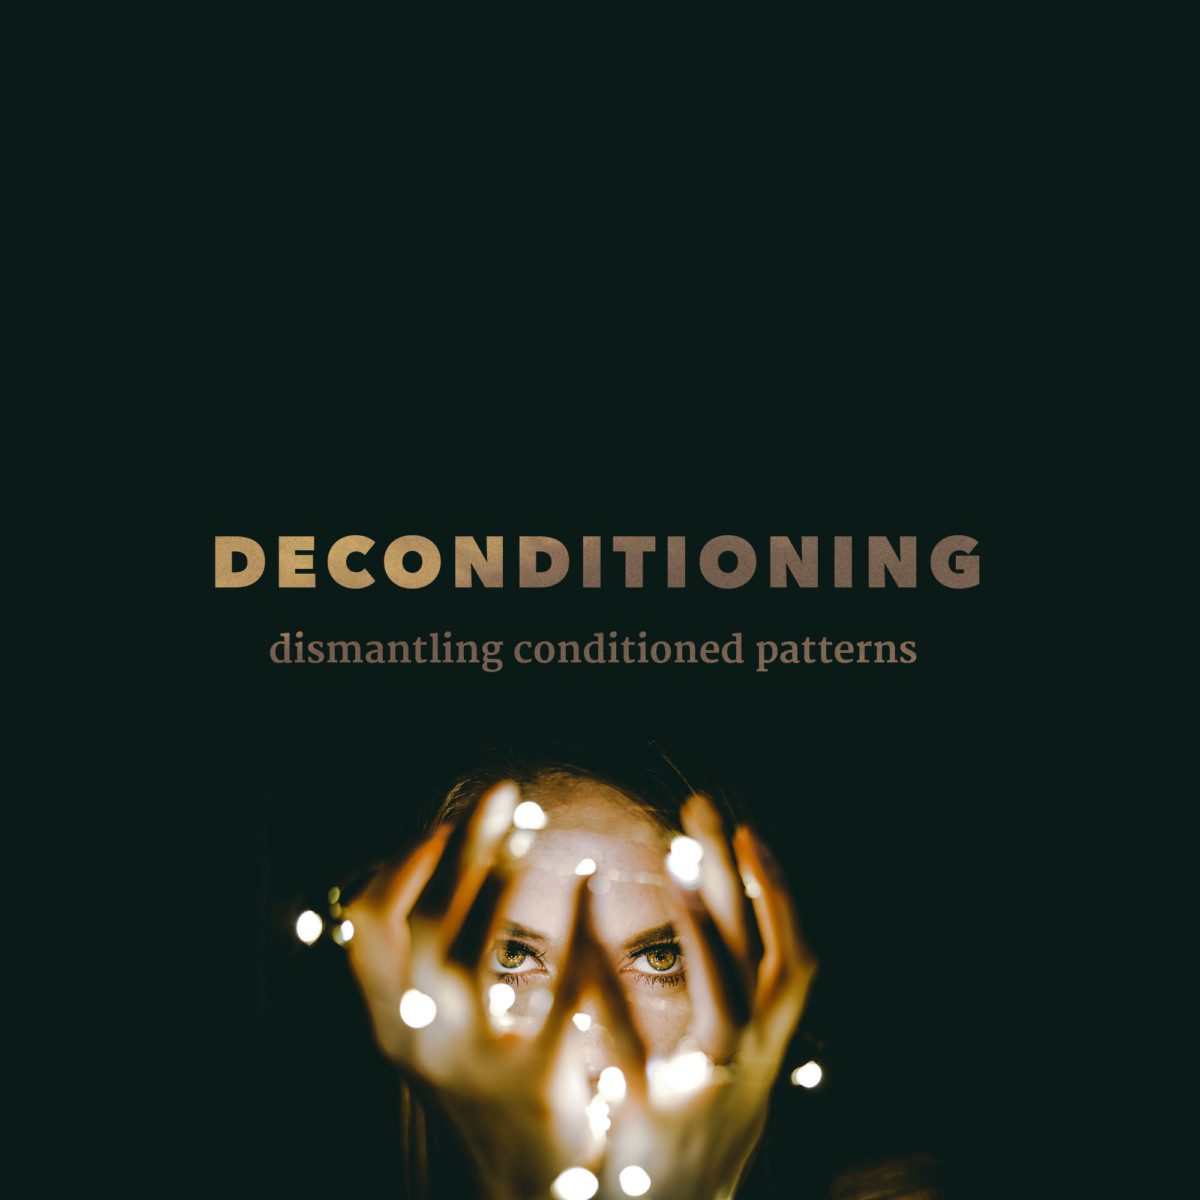 DECONDITIONING - dismantling conditioned patterns